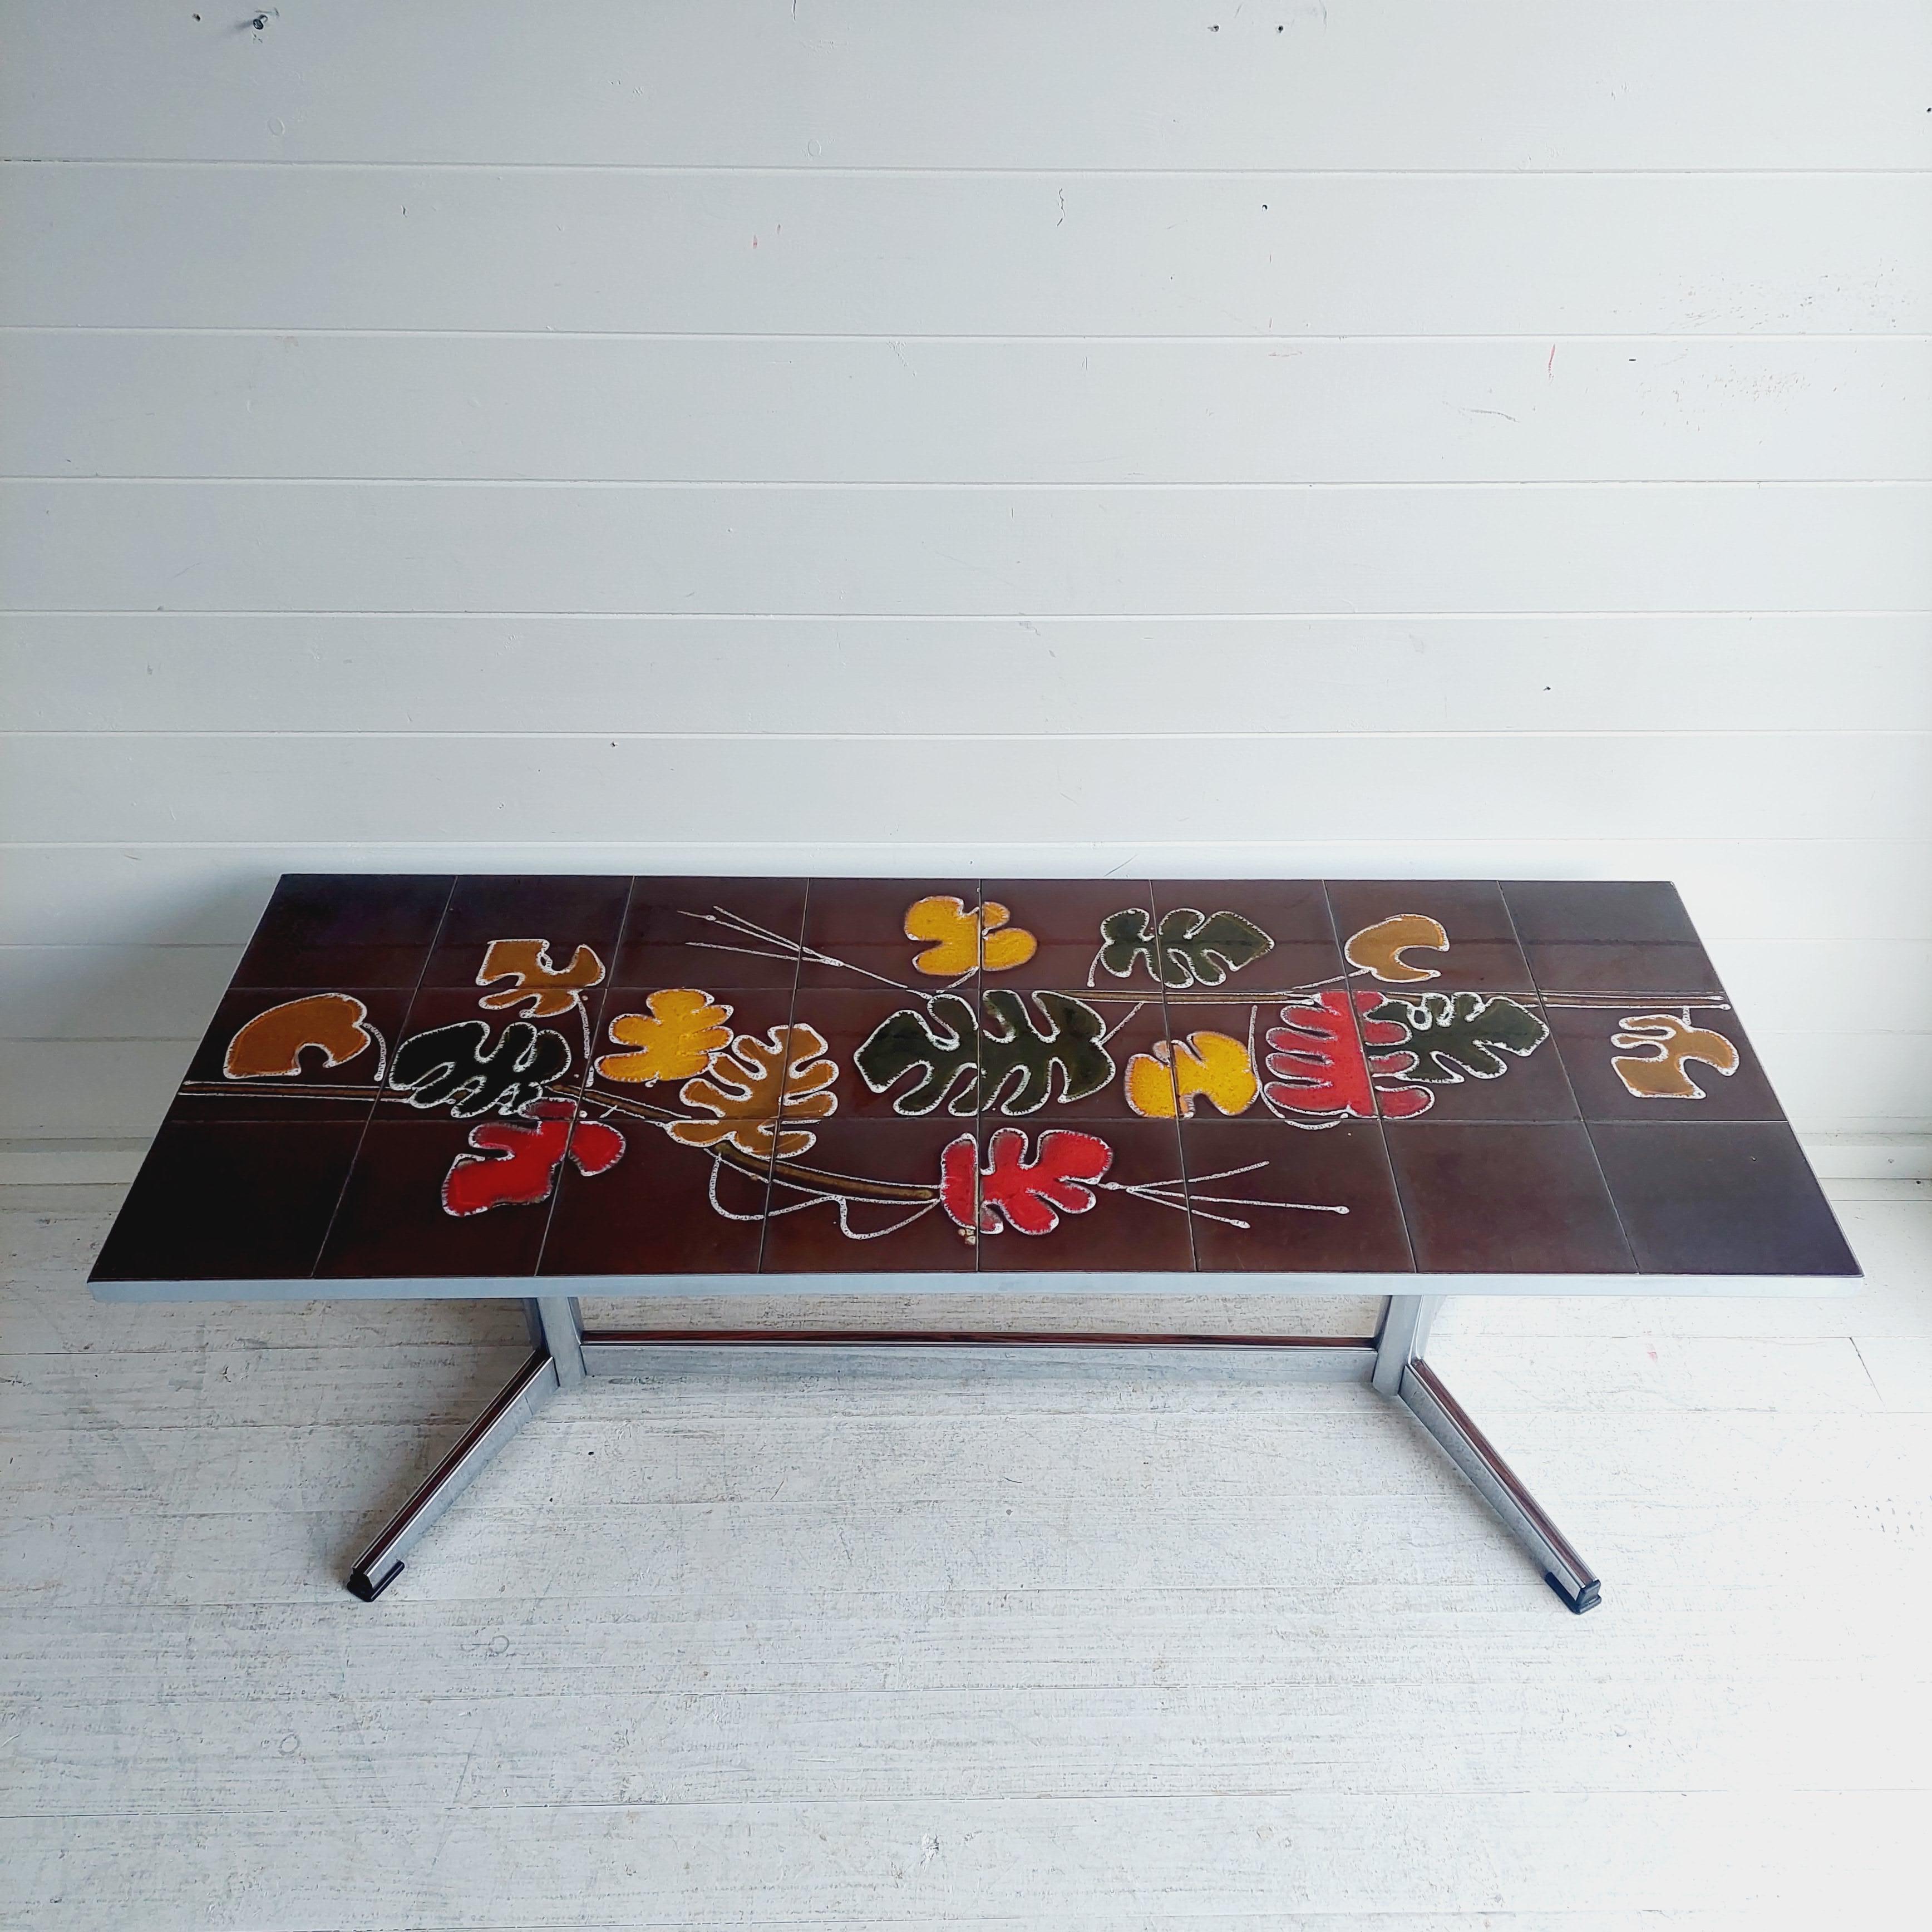 Mid-Century Modern tile table supported on chrome frame base
Belgium design from the 1960-1970s. attributed to Julliette Belarti for Adri ( not signed).
Beautifully crafted chrome and ceramic tile coffee table by Belgian design firm Adri Belgique,